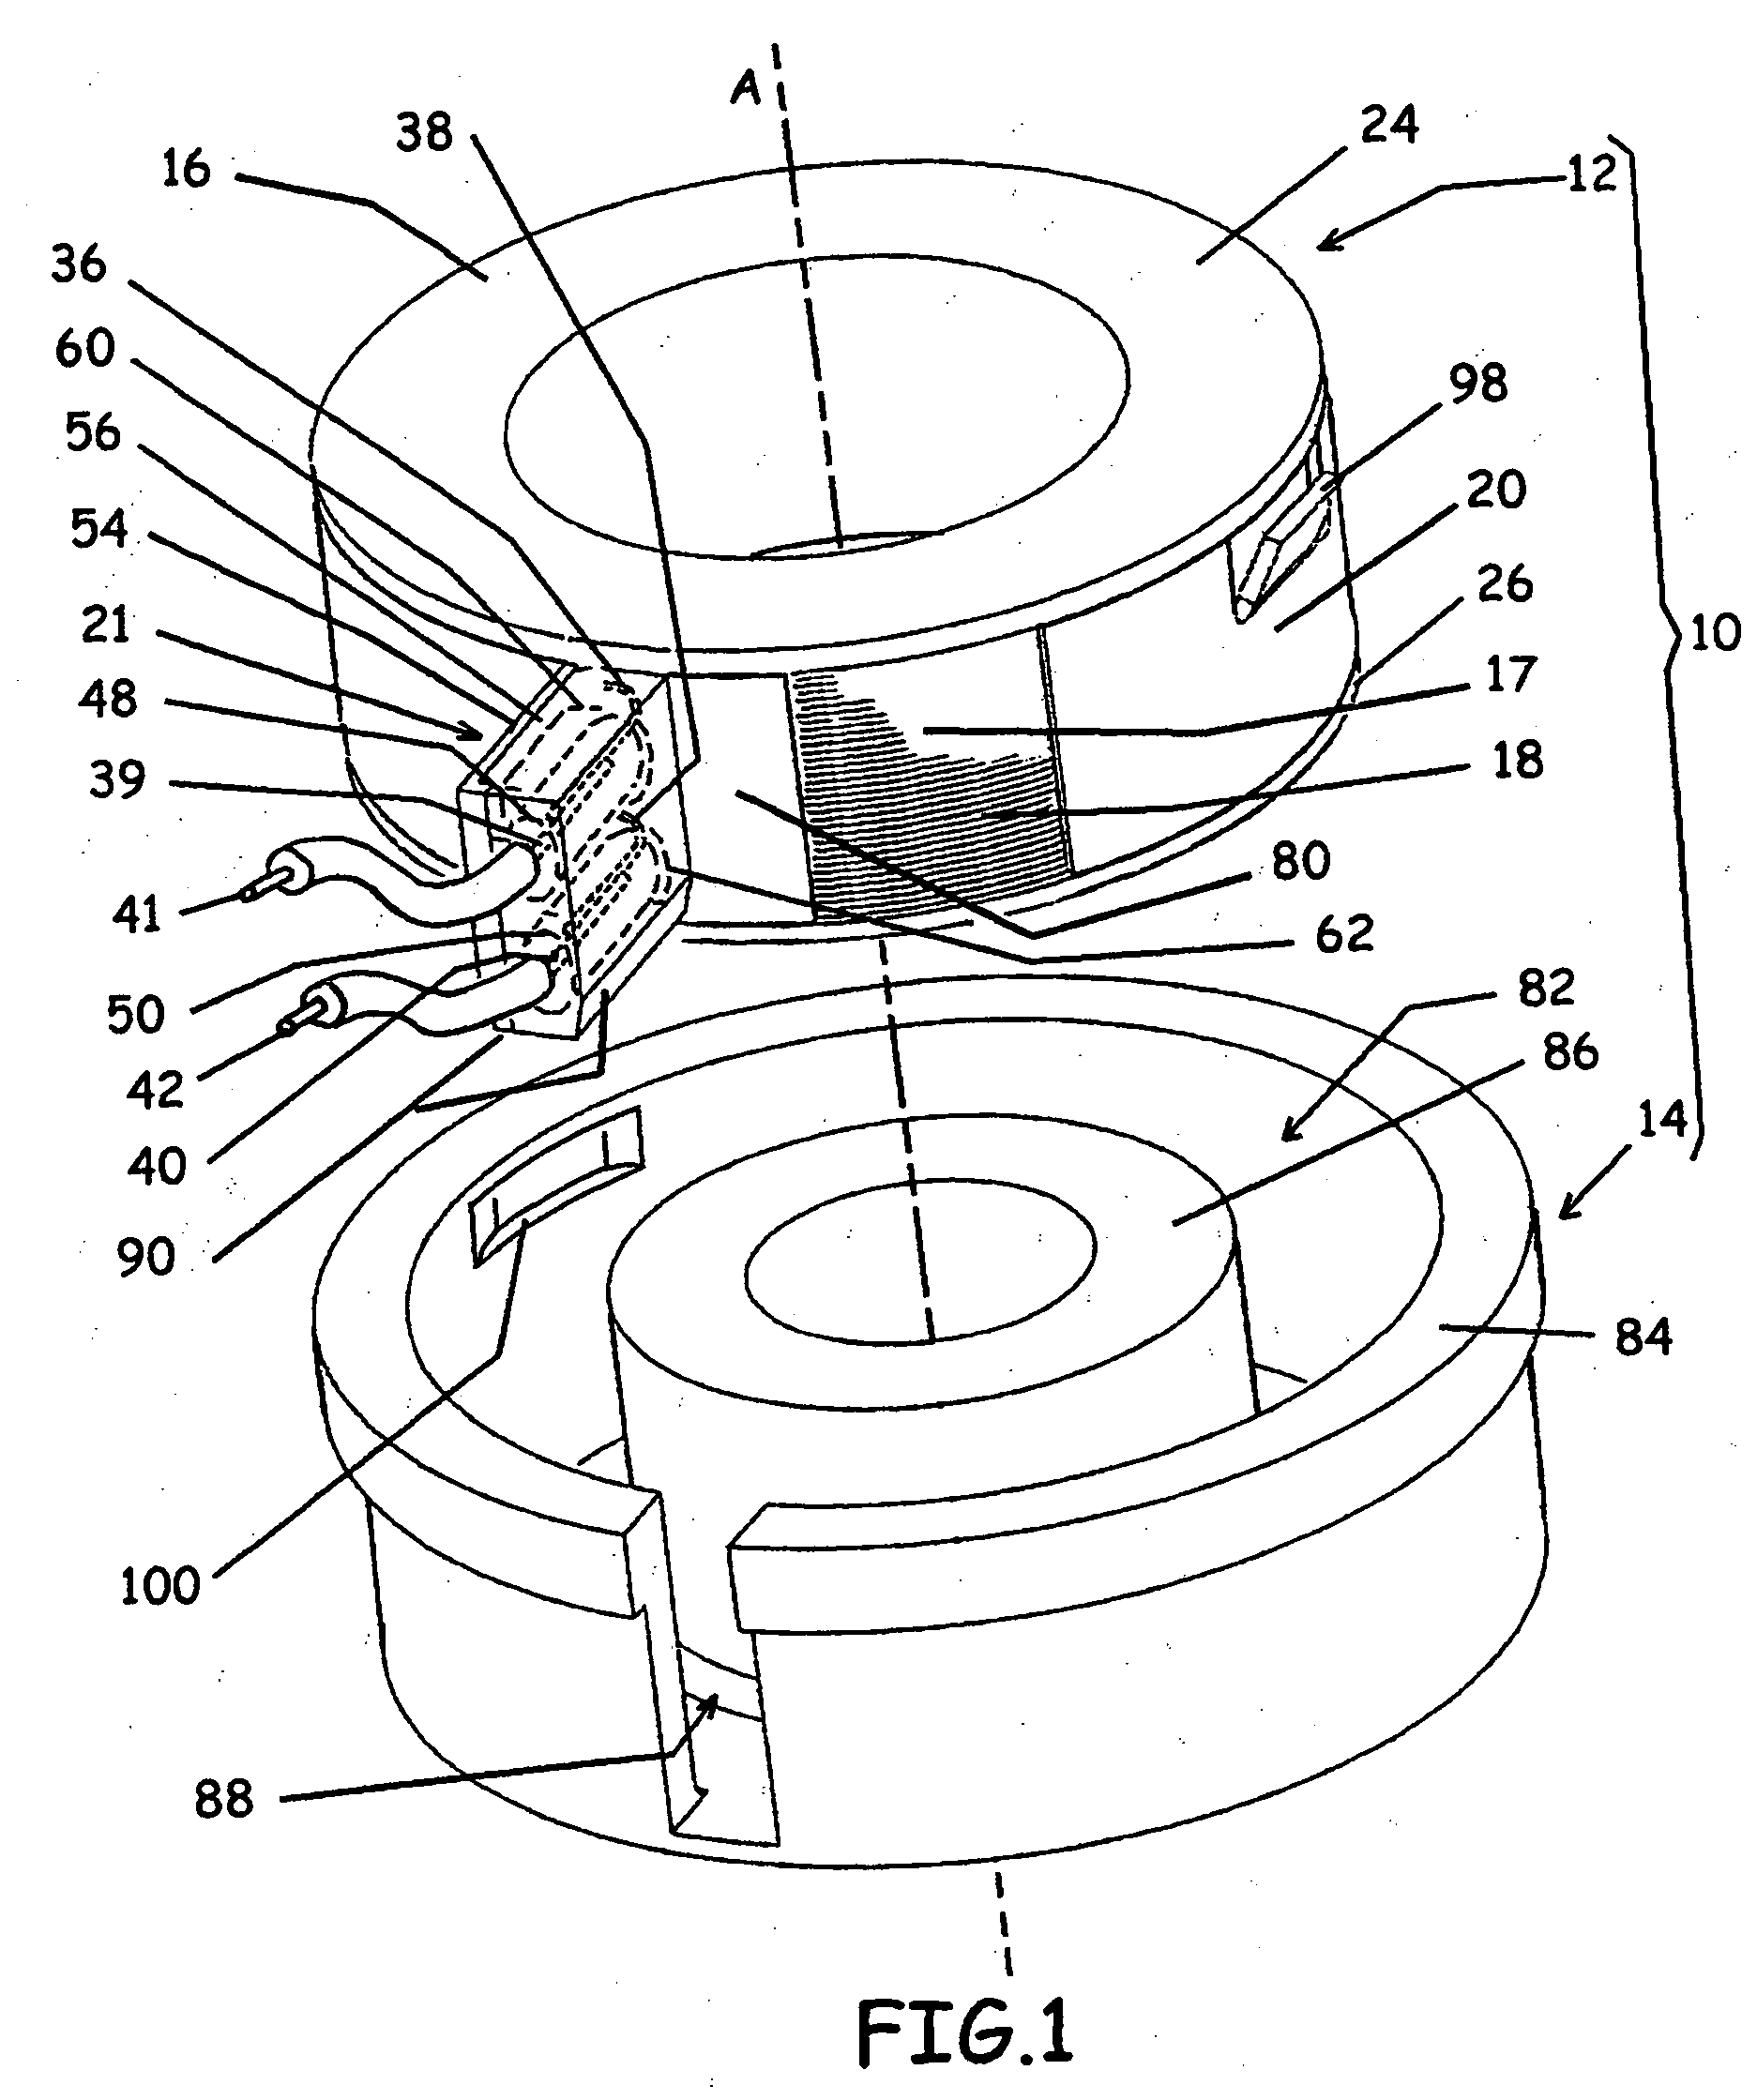 Electromagnetic coil assembly